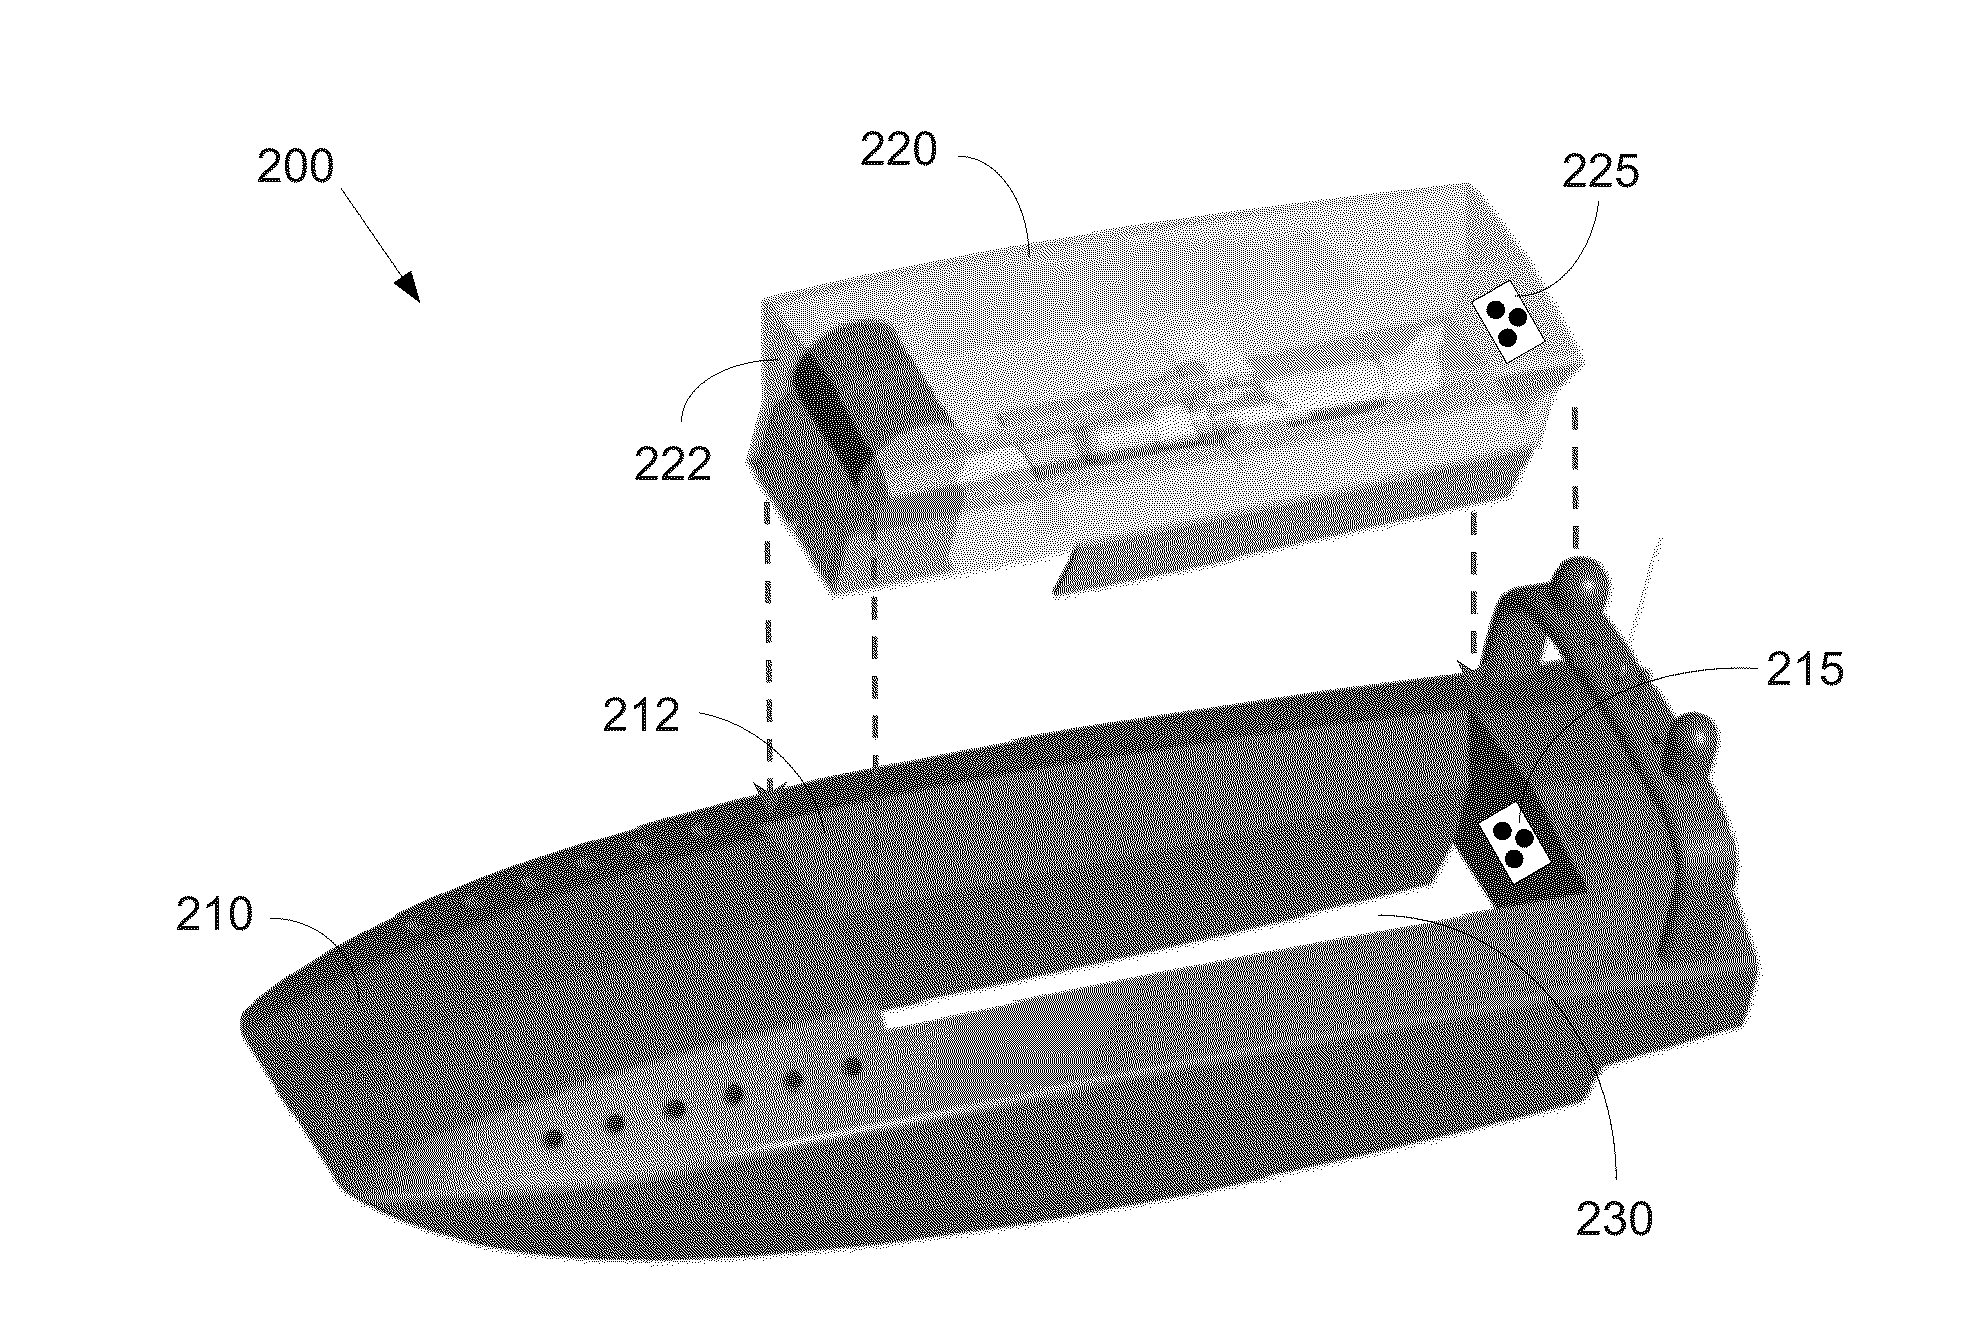 Catamaran surface vessel with removable mission-specific payload module